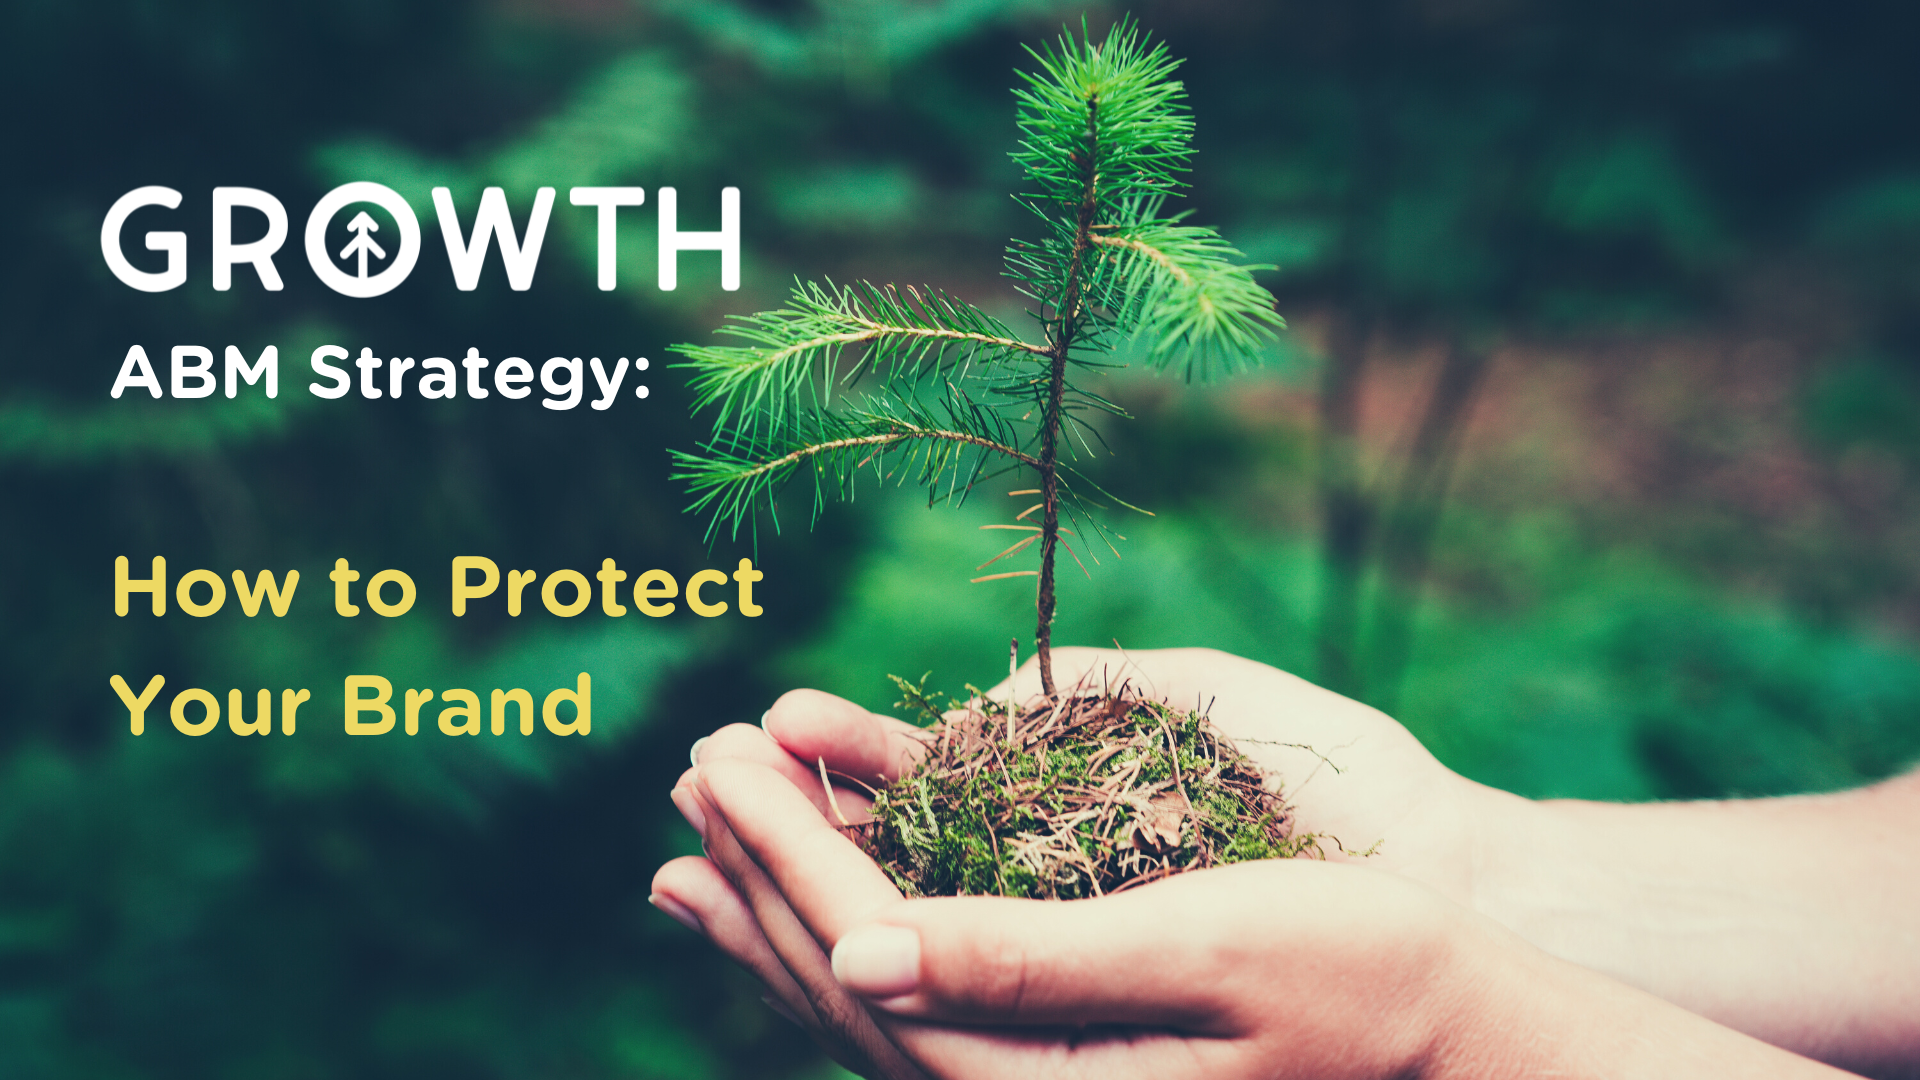 ABM Strategy: 5 Tips for Protecting Your Brand